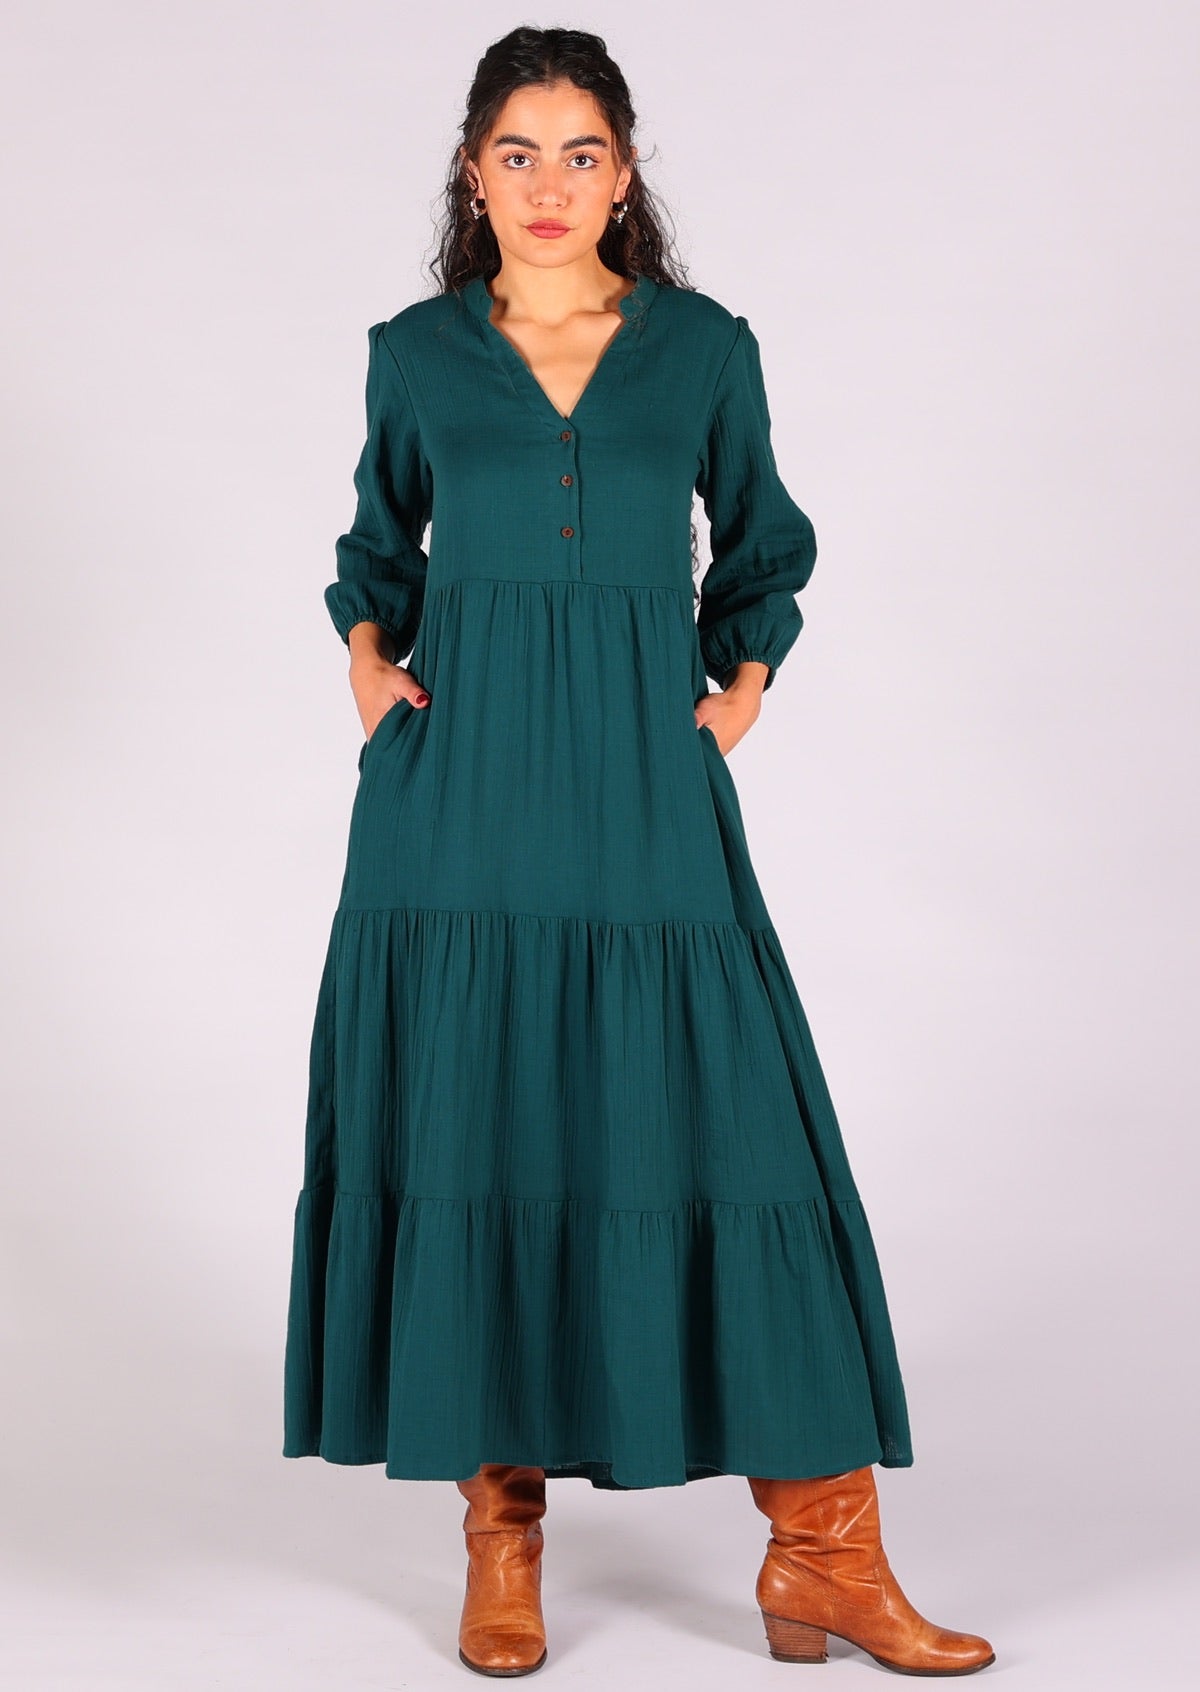 Double cotton maxi dress in deep teal with 3/4 sleeves and hidden side pockets